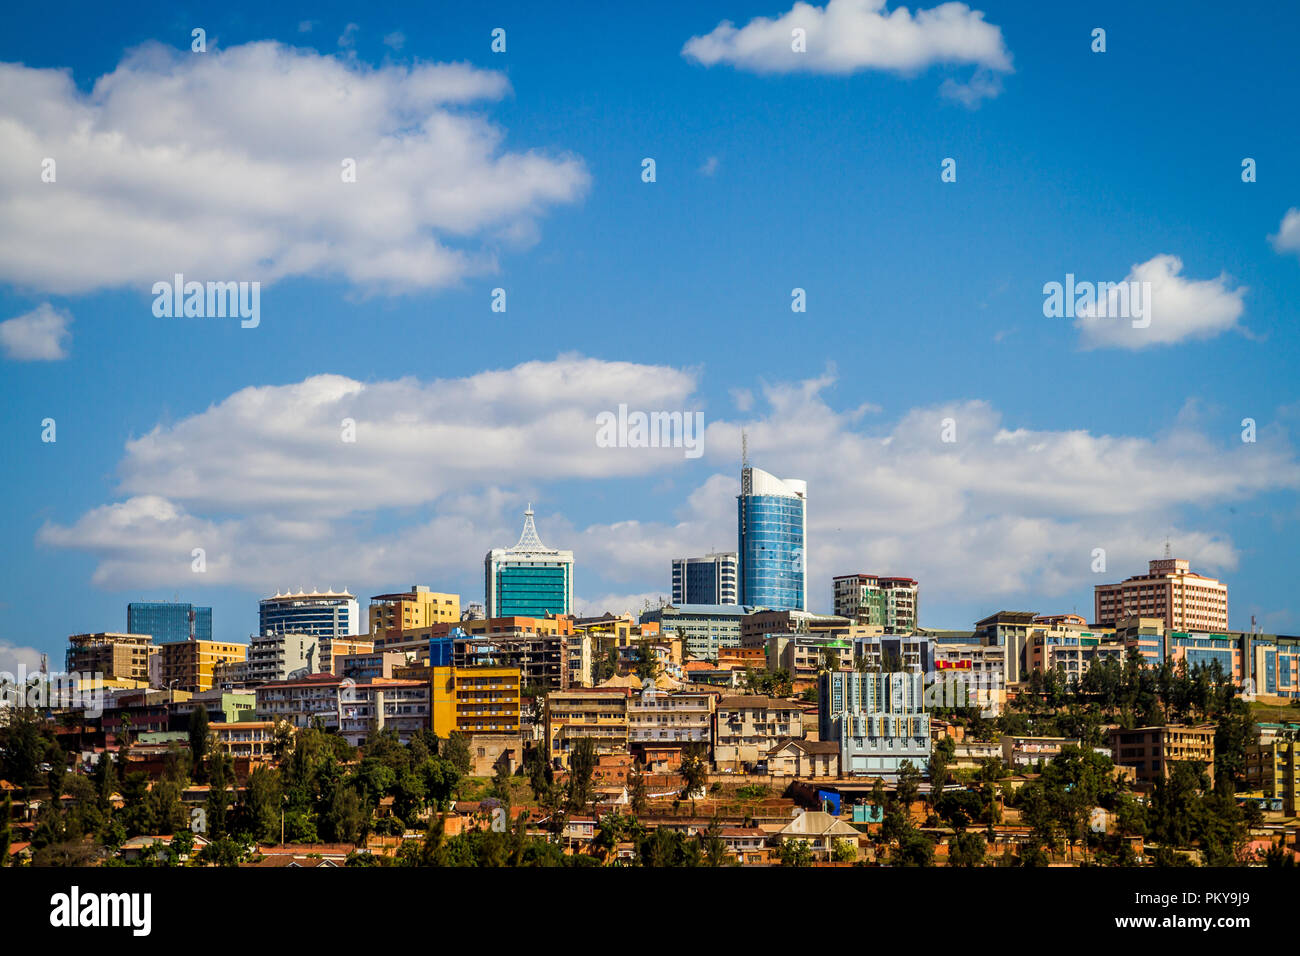 The downtown Kigali skyline on a sunny summer day with blue skies. Stock Photo